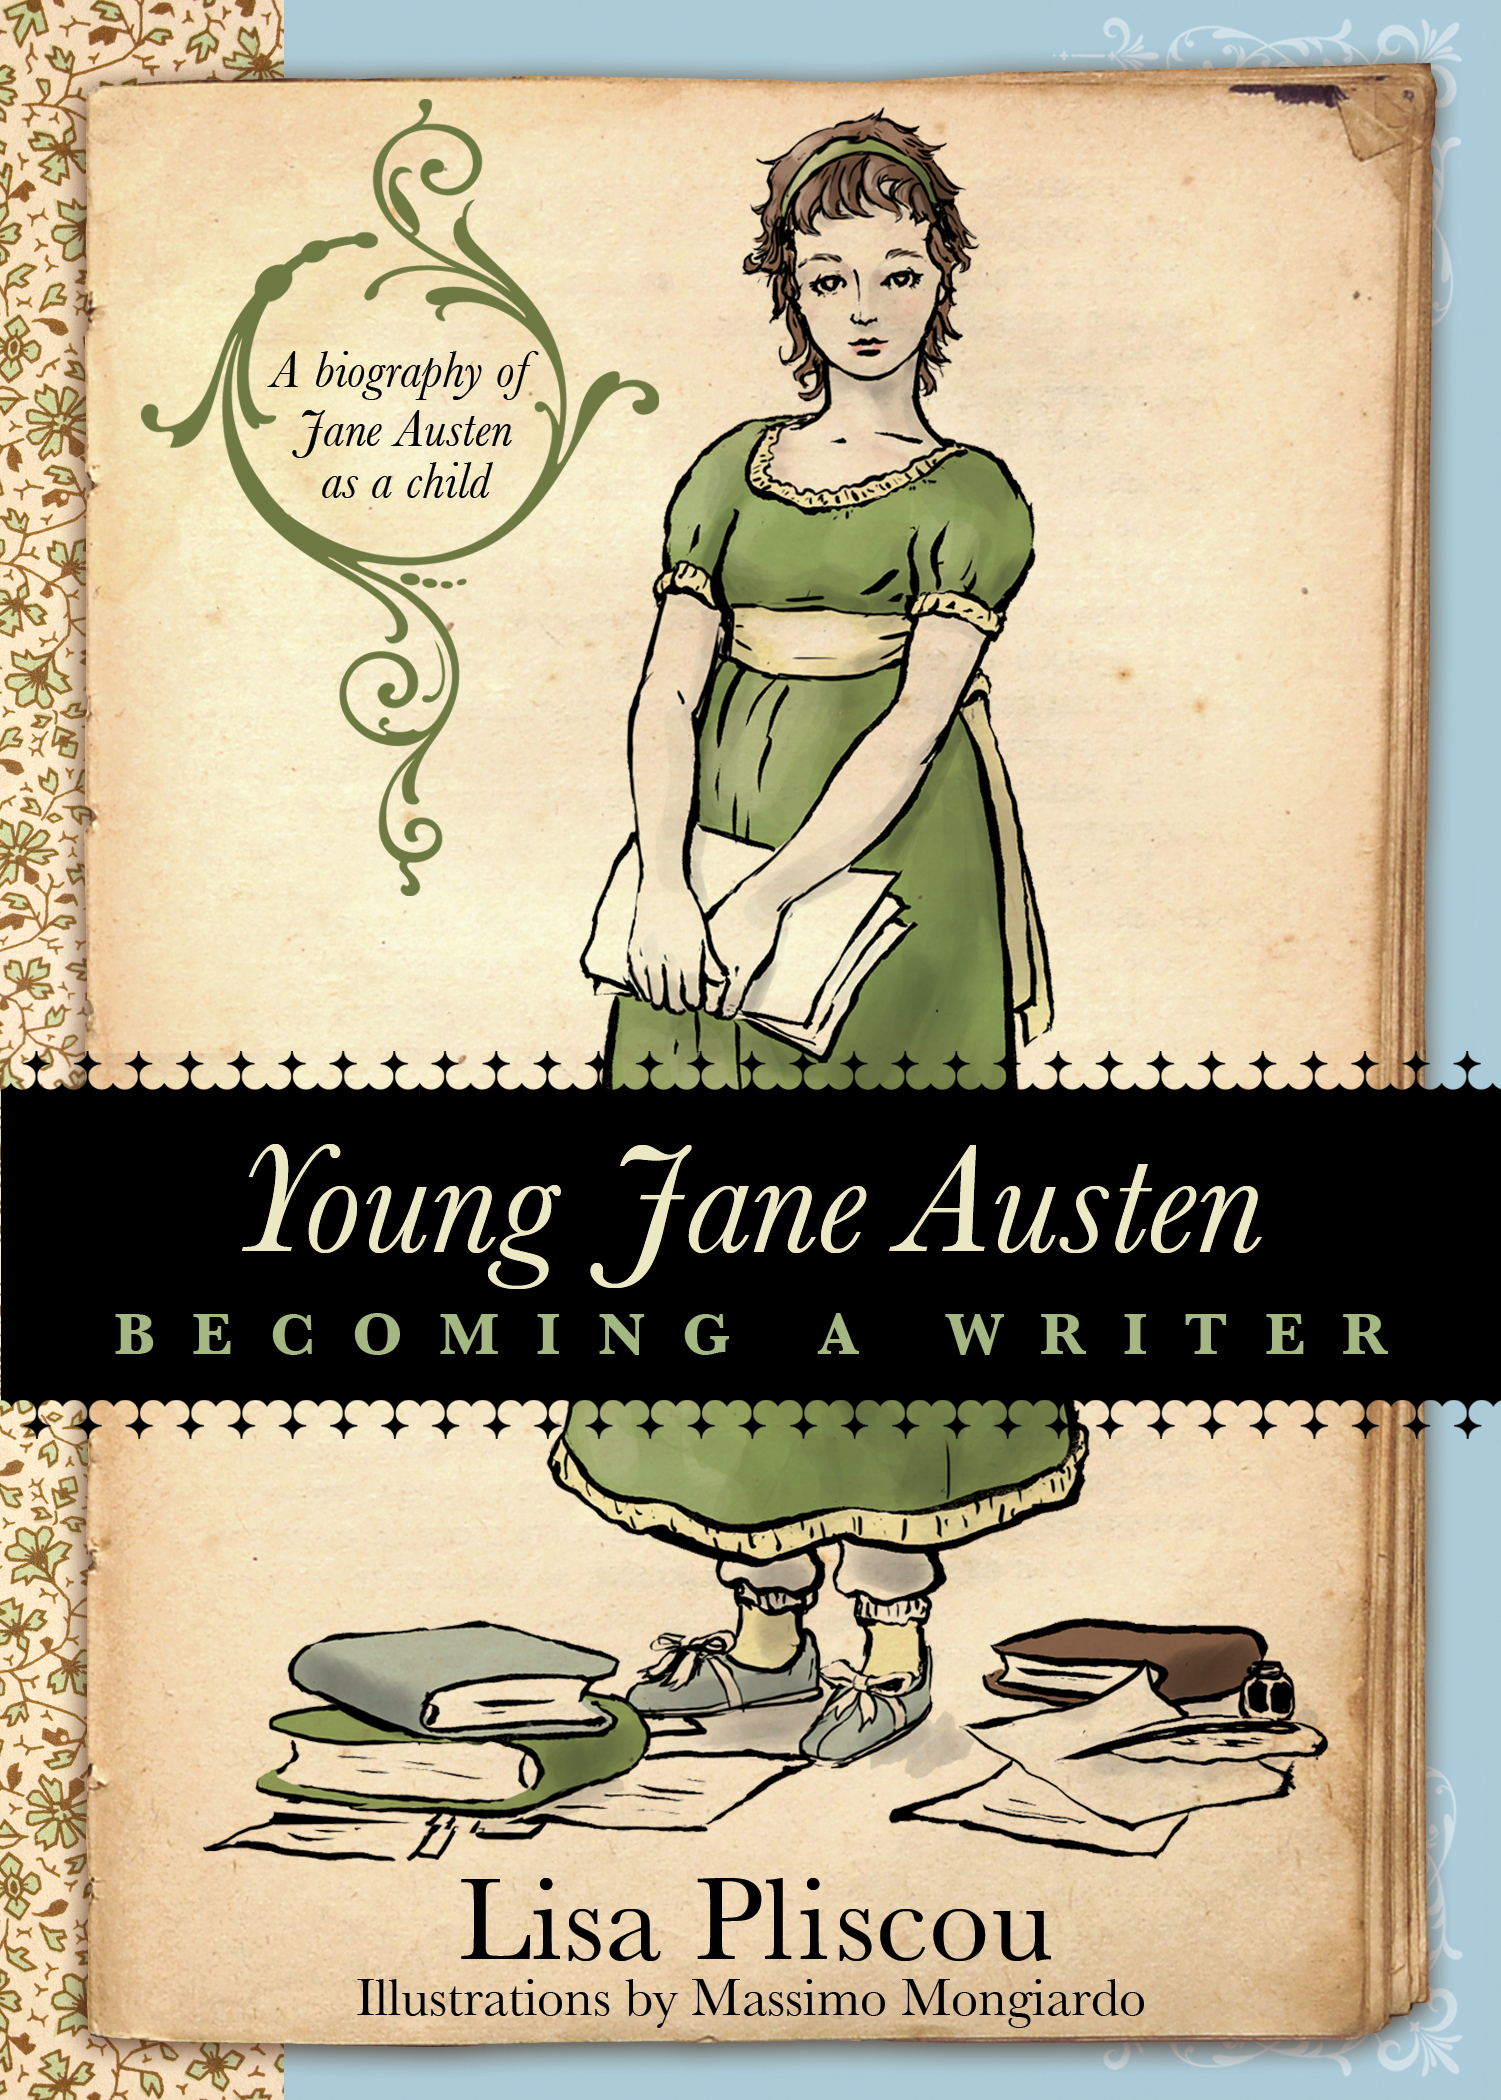 Young Jane Austen: Becoming a Writer (April 2015)